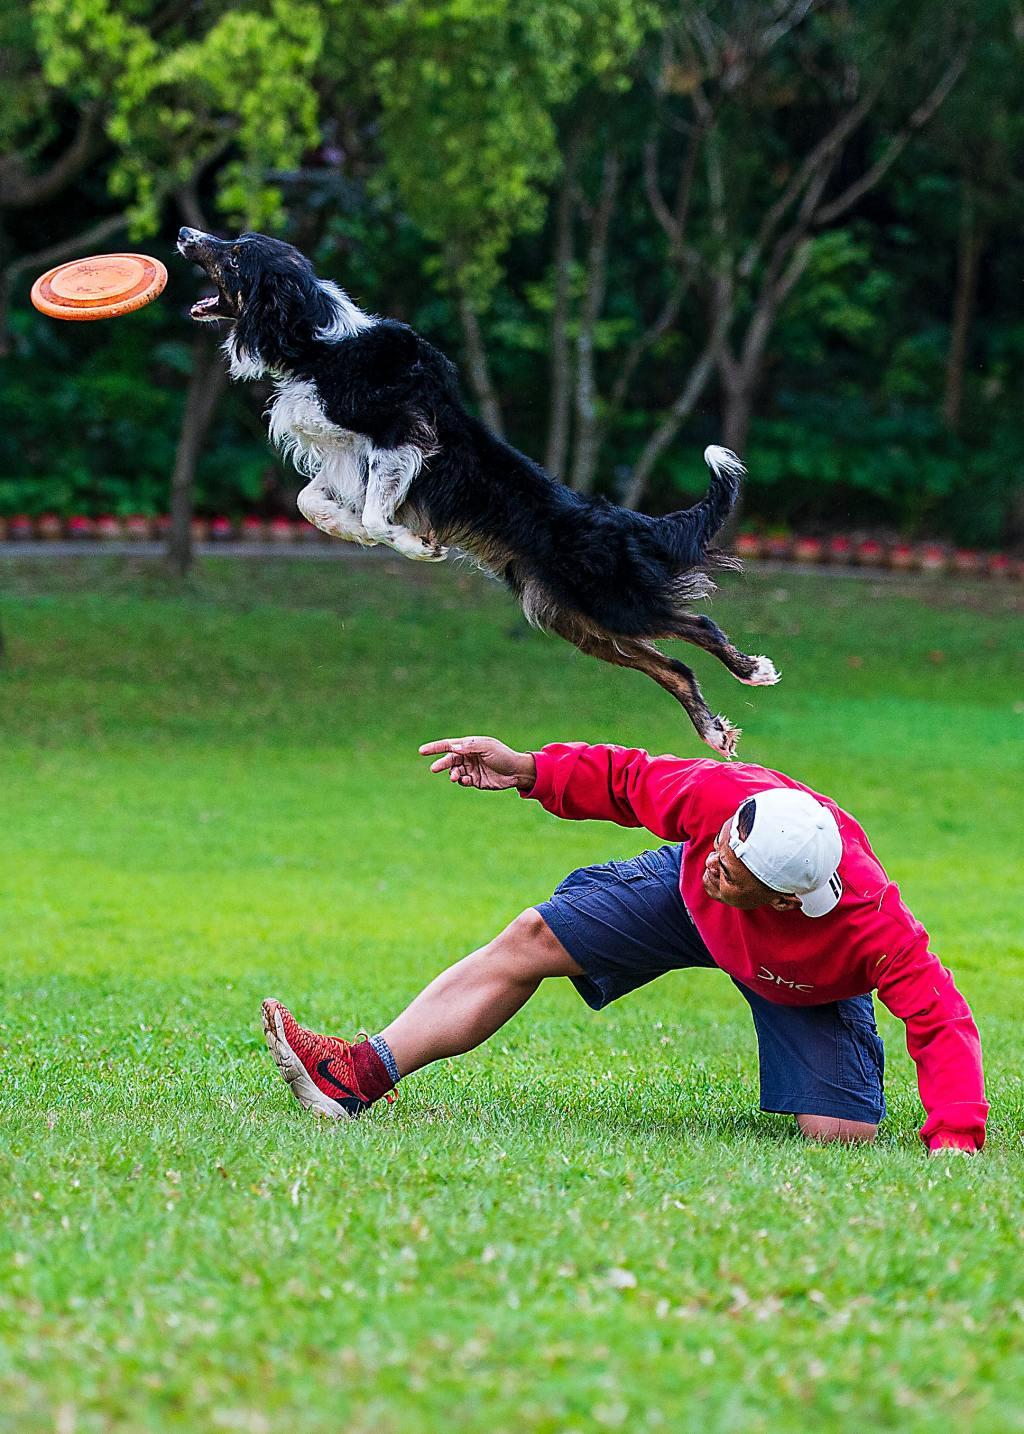 “A dog’s brain in action: Insights into effective Dog training methods”